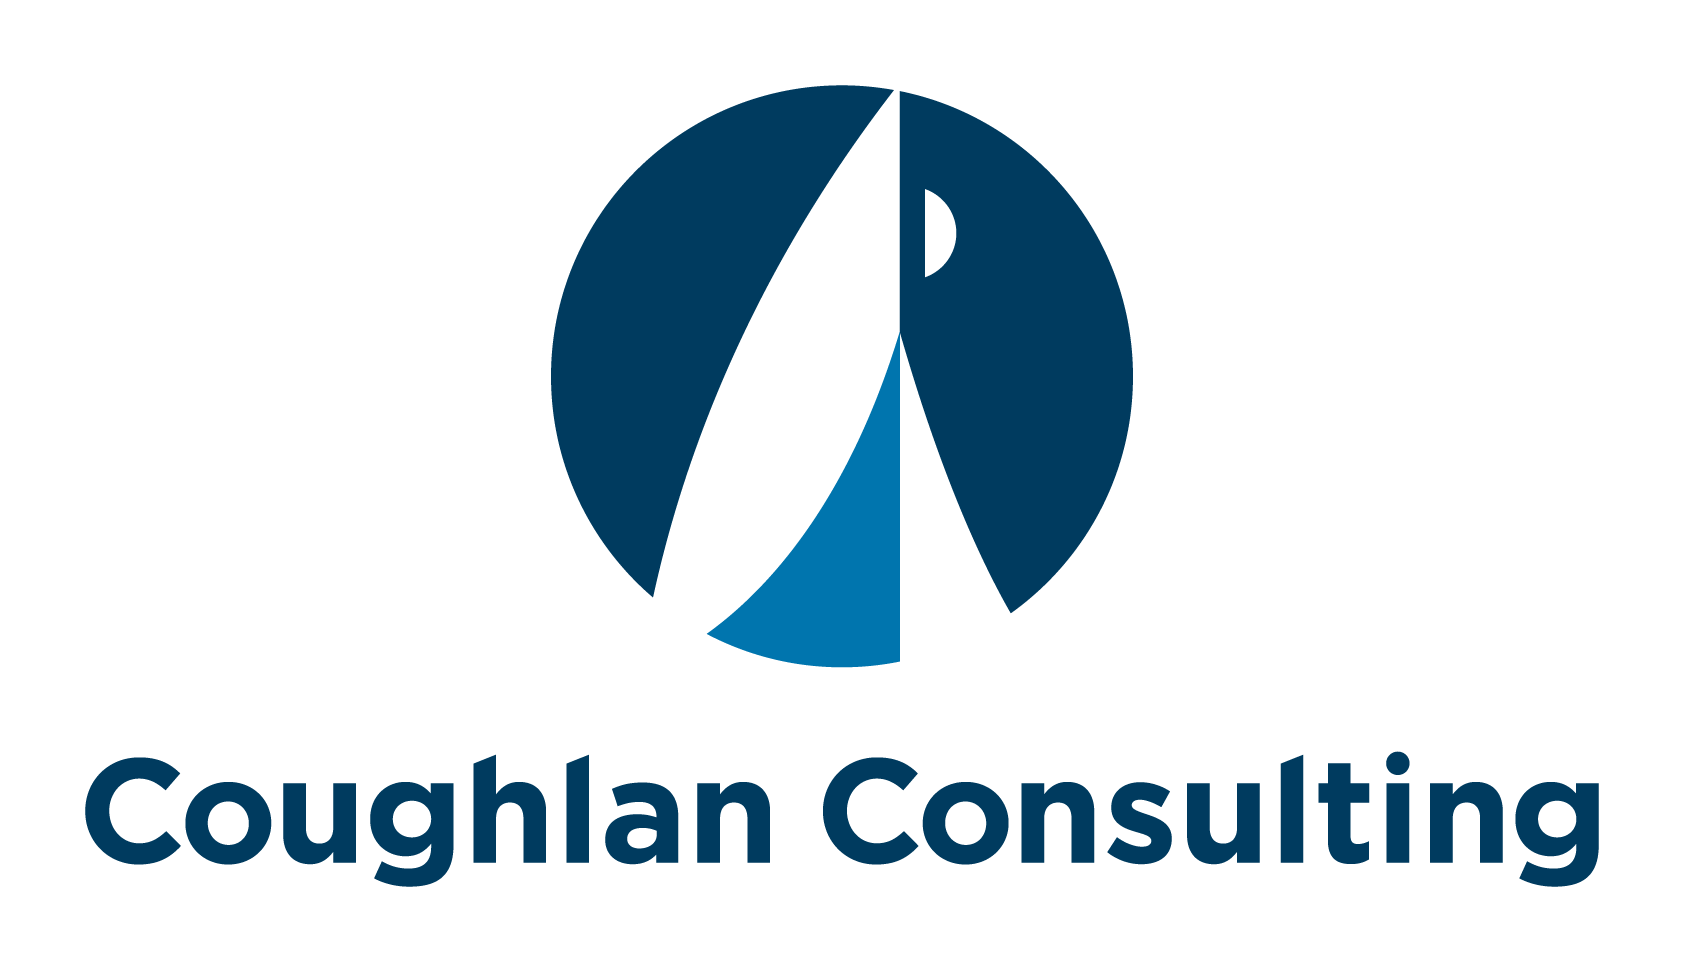 Coughlan Consulting